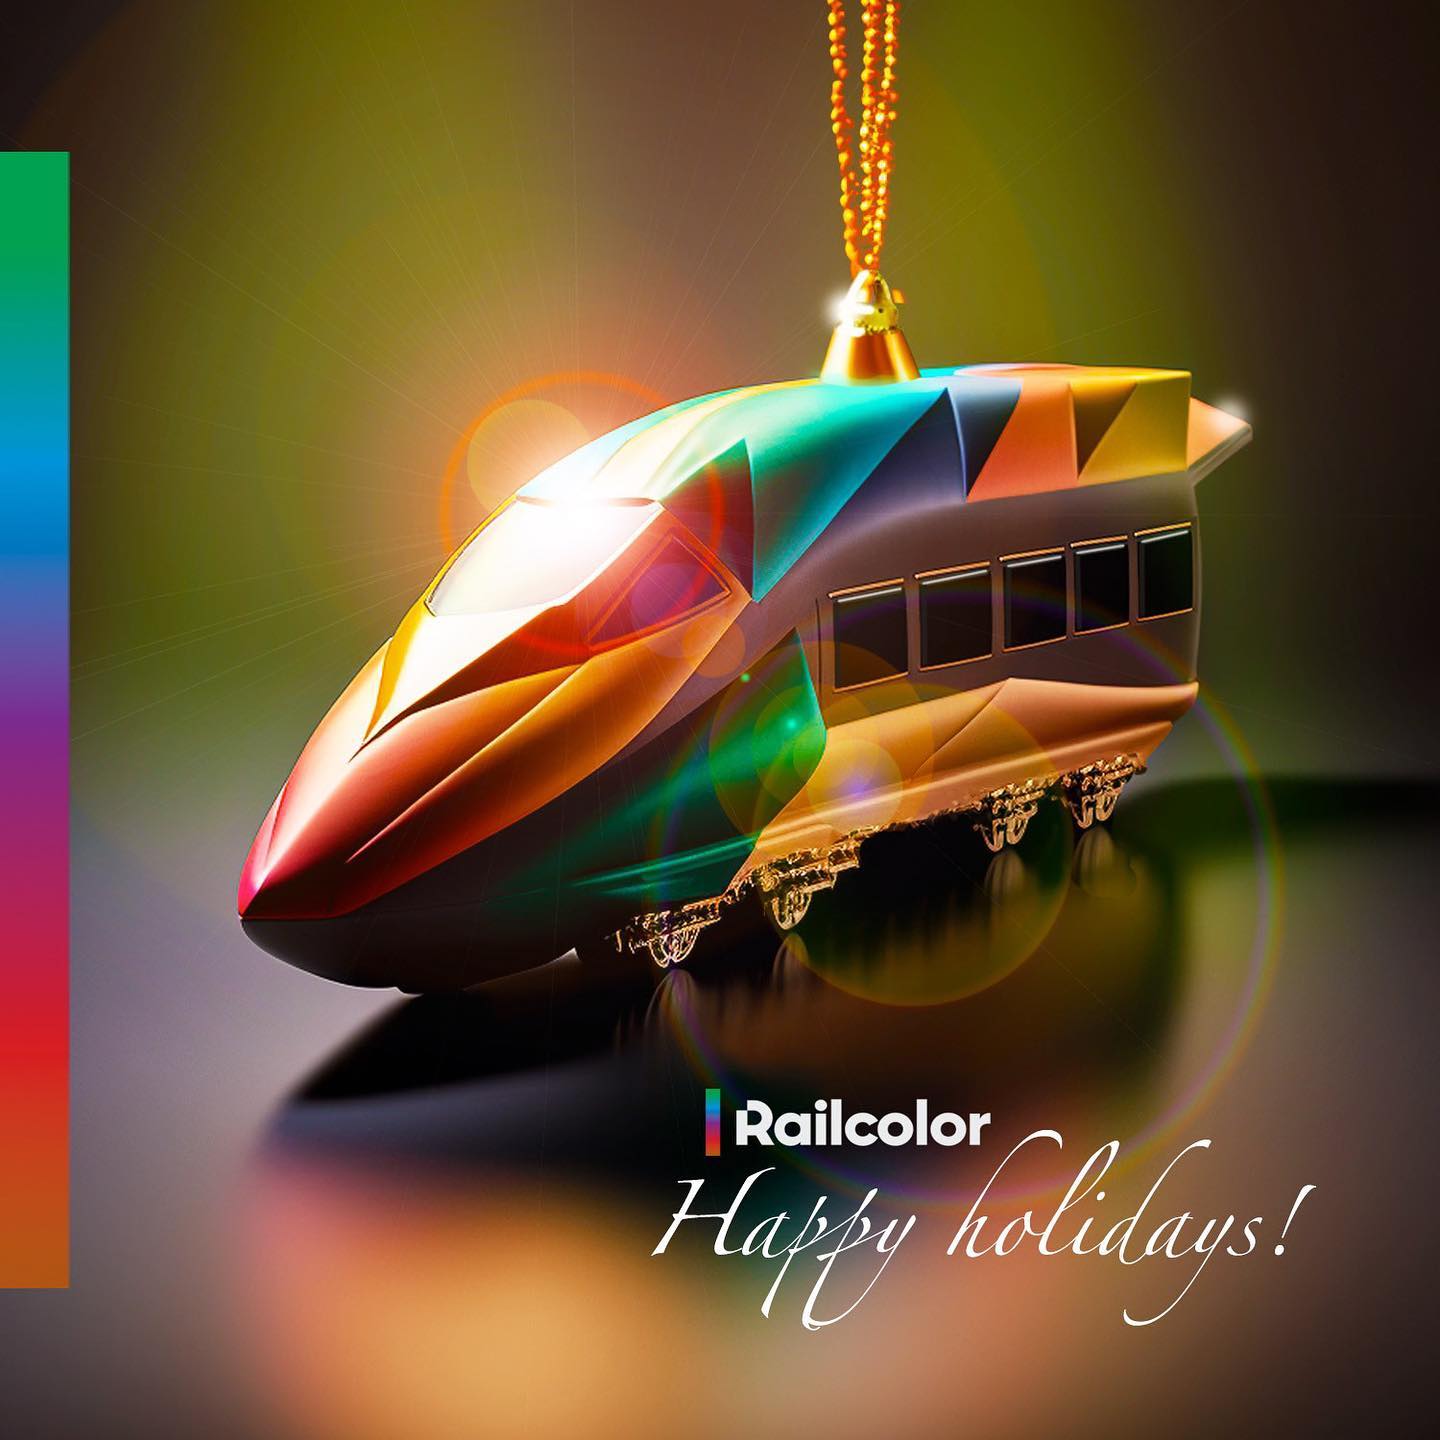 🎅🏻 Happy holidays from the Railcolor Team! 🎄 We hope you’re surrounded by the people and/or things that make you happy these holidays! ✨ Also a very big thank you to our subscribers, followers, spotters, and many more, that made Railcolor possible over the last year! 2️⃣0️⃣2️⃣2️⃣ 
.
.
.
.
.
#happyholidays #railcolor #railcolornews #railways #eisenbahn #eisenbahner